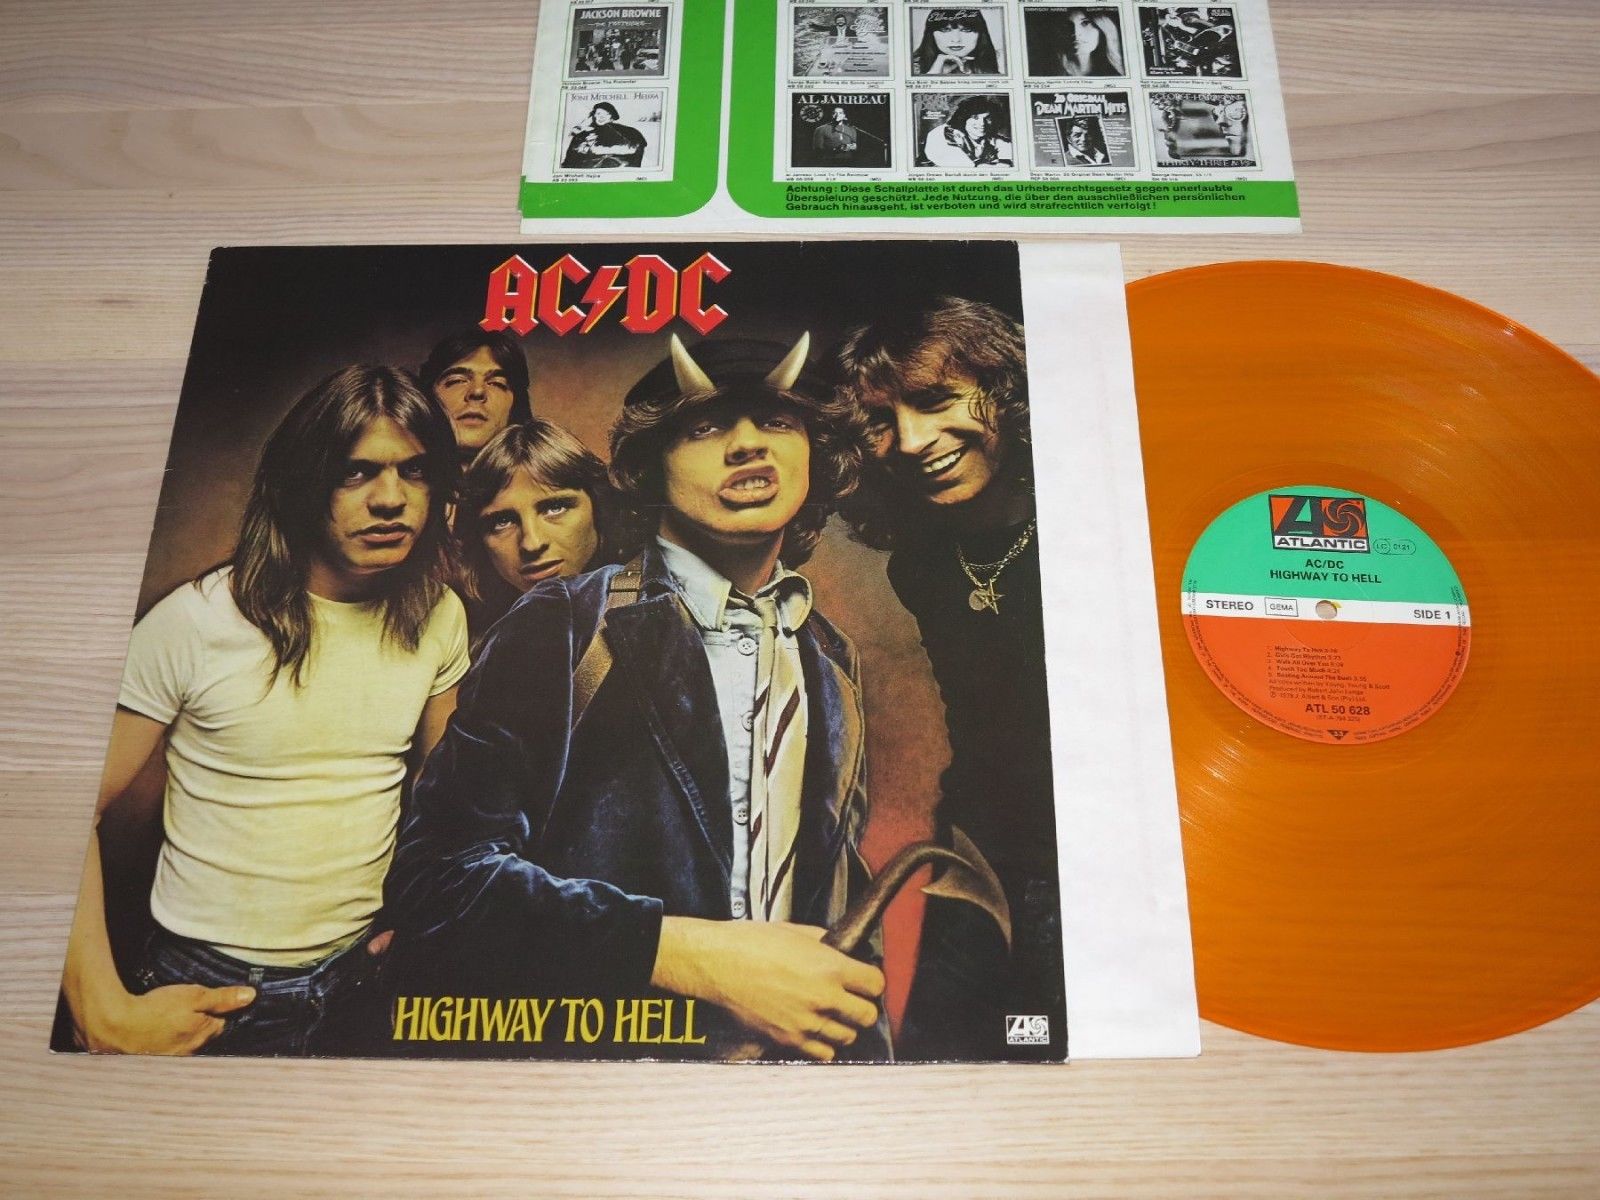 popsike.com - AC/DC ACDC Orange Vinyl LP - Highway To Hell / GERMAN LIMITED  PRESS IN MINT - auction details